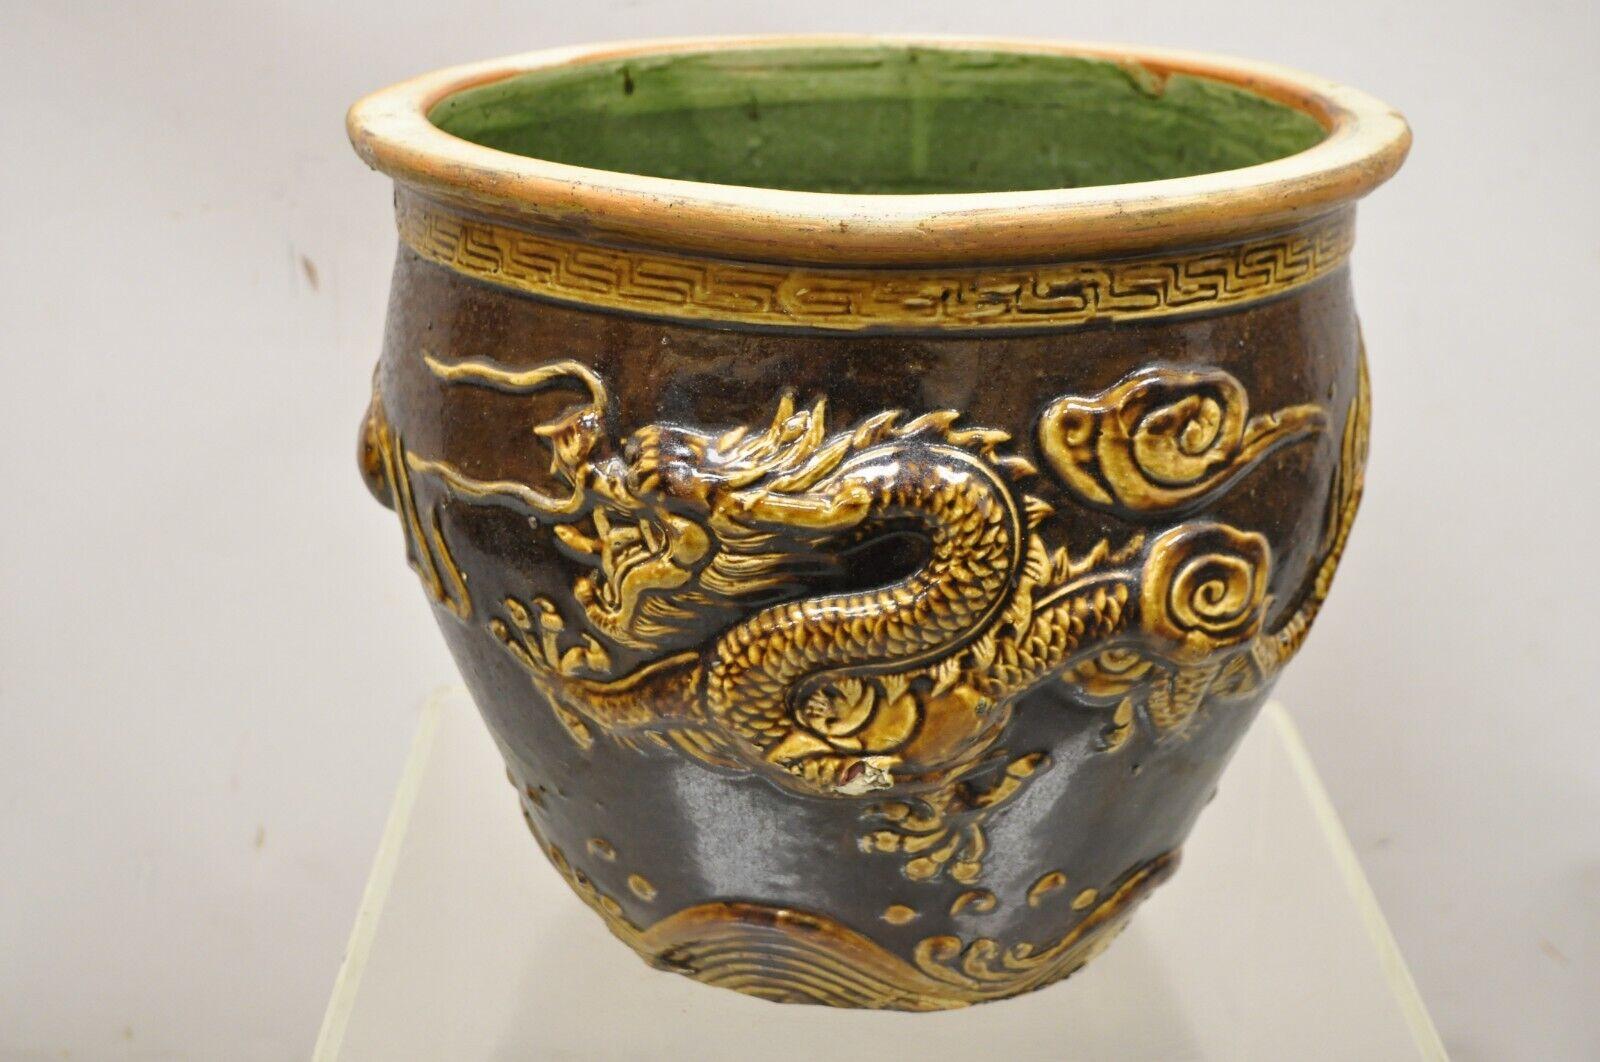 Vintage Chinese Brown Glazed Ceramic Dragon Cachepot Planter Pot - a Pair. Item featured has raised/relief designed dragons, brown glazed finish, very nice vintage pair, great style and form. Circa Early to Mid 20th Century. Measurements: 13